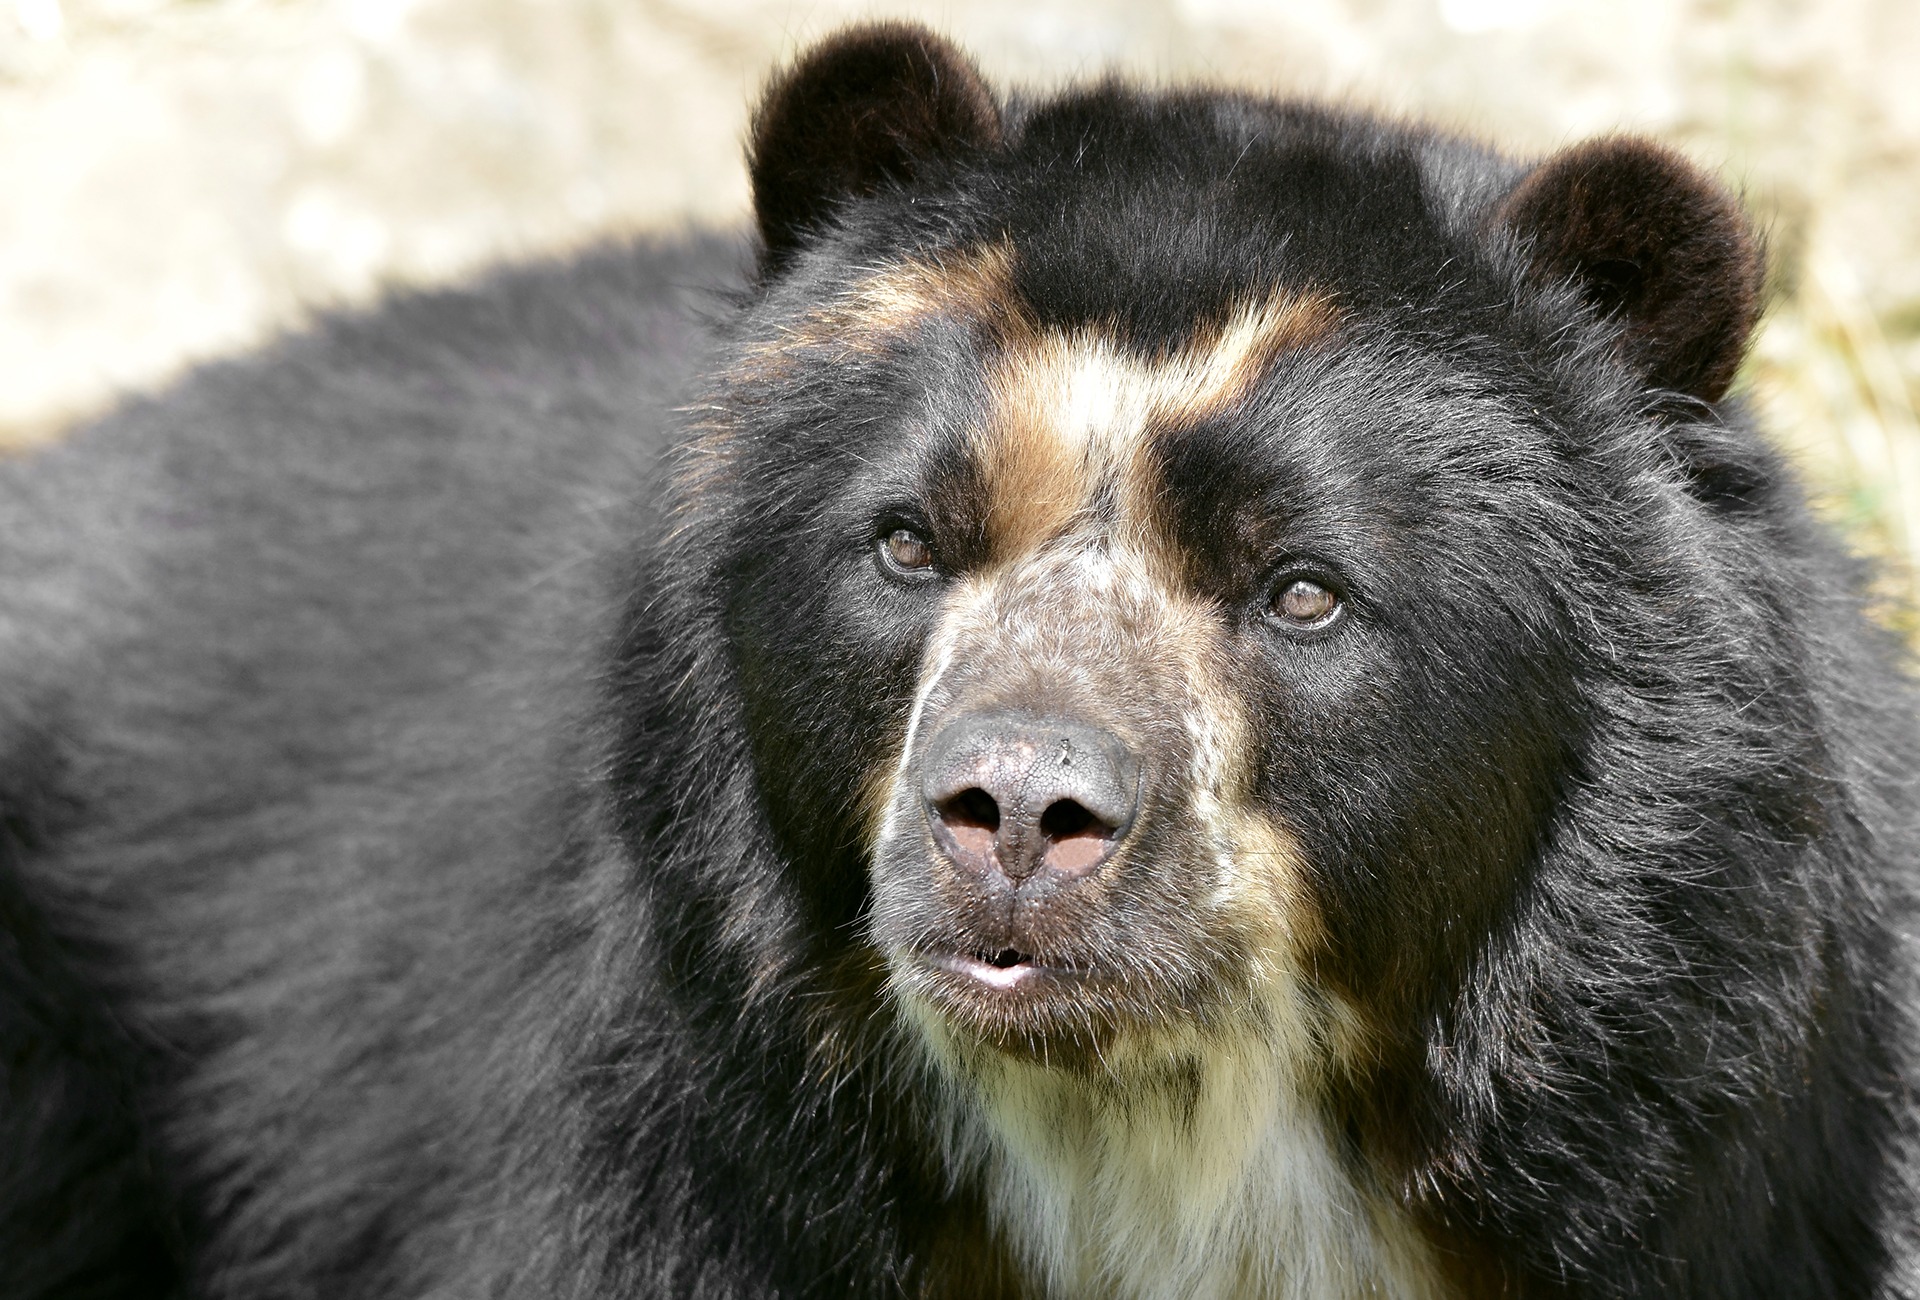 Spectacled Bear also known as the Andean Bear, by Christian Musat